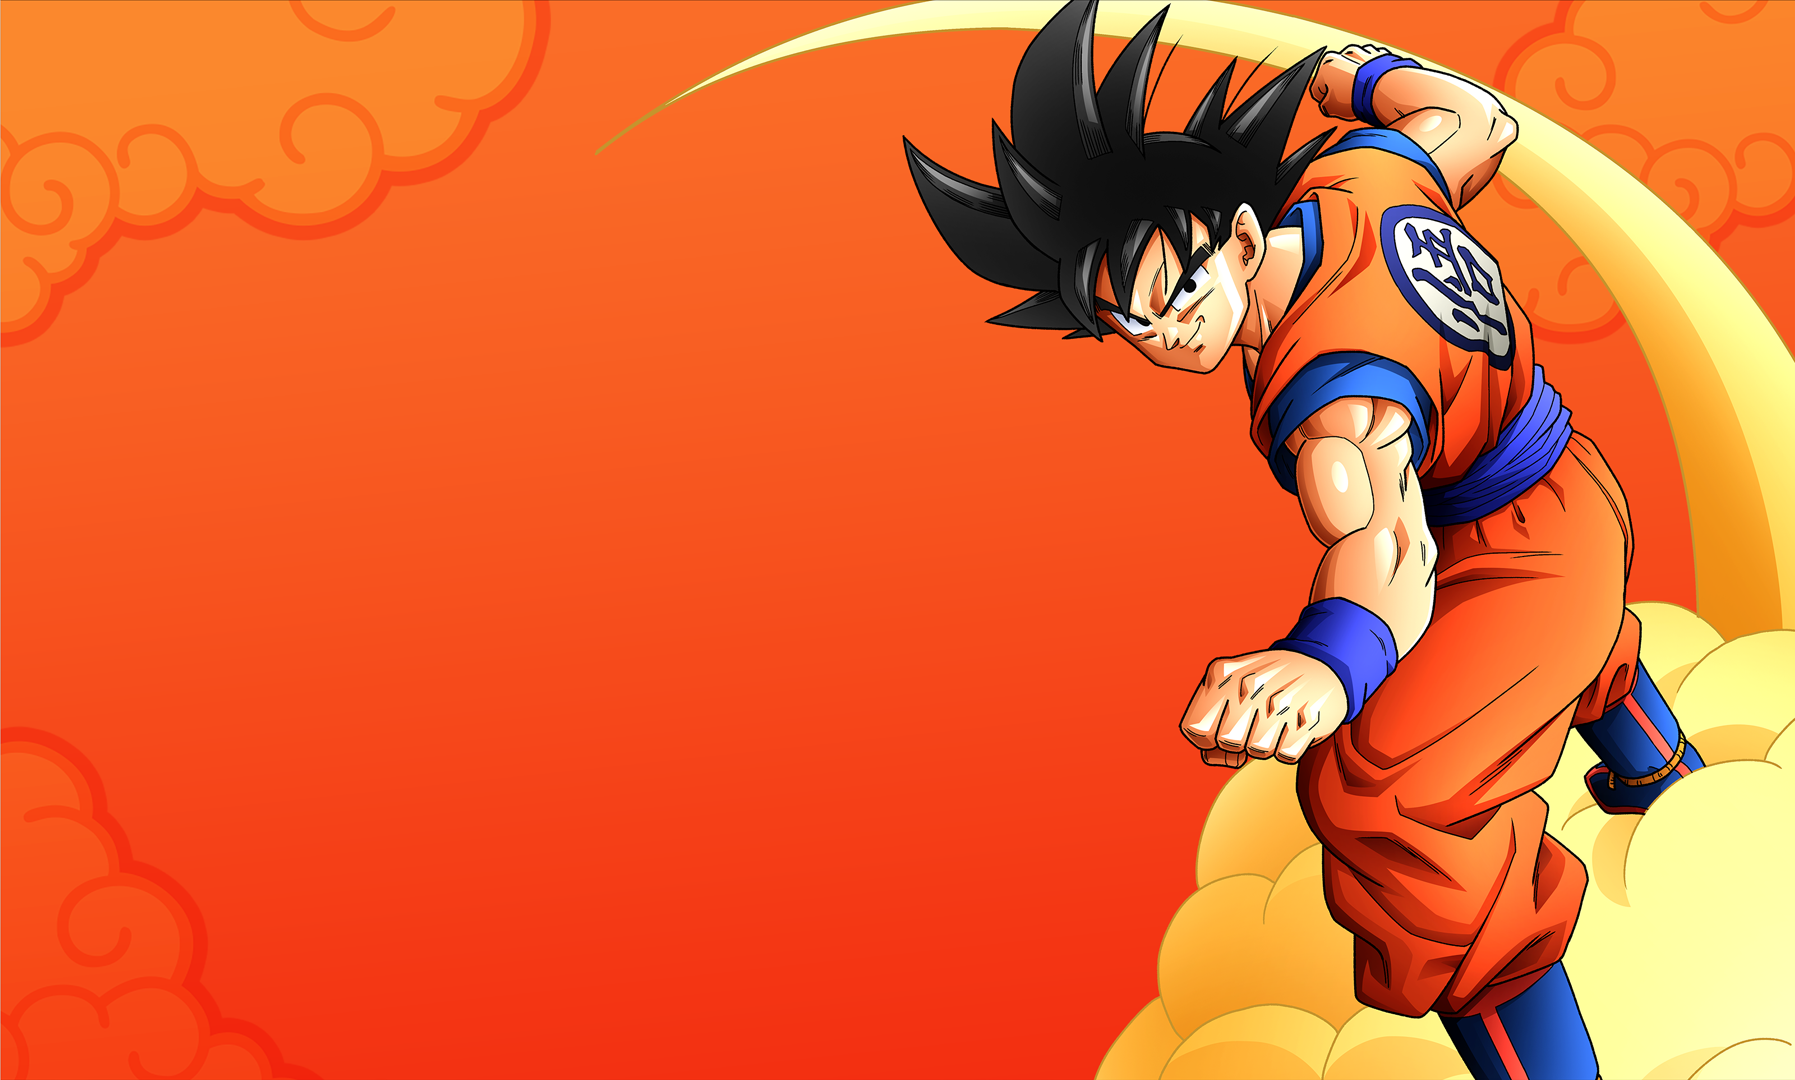 Top 25 Best DBZ Wallpapers of All Time